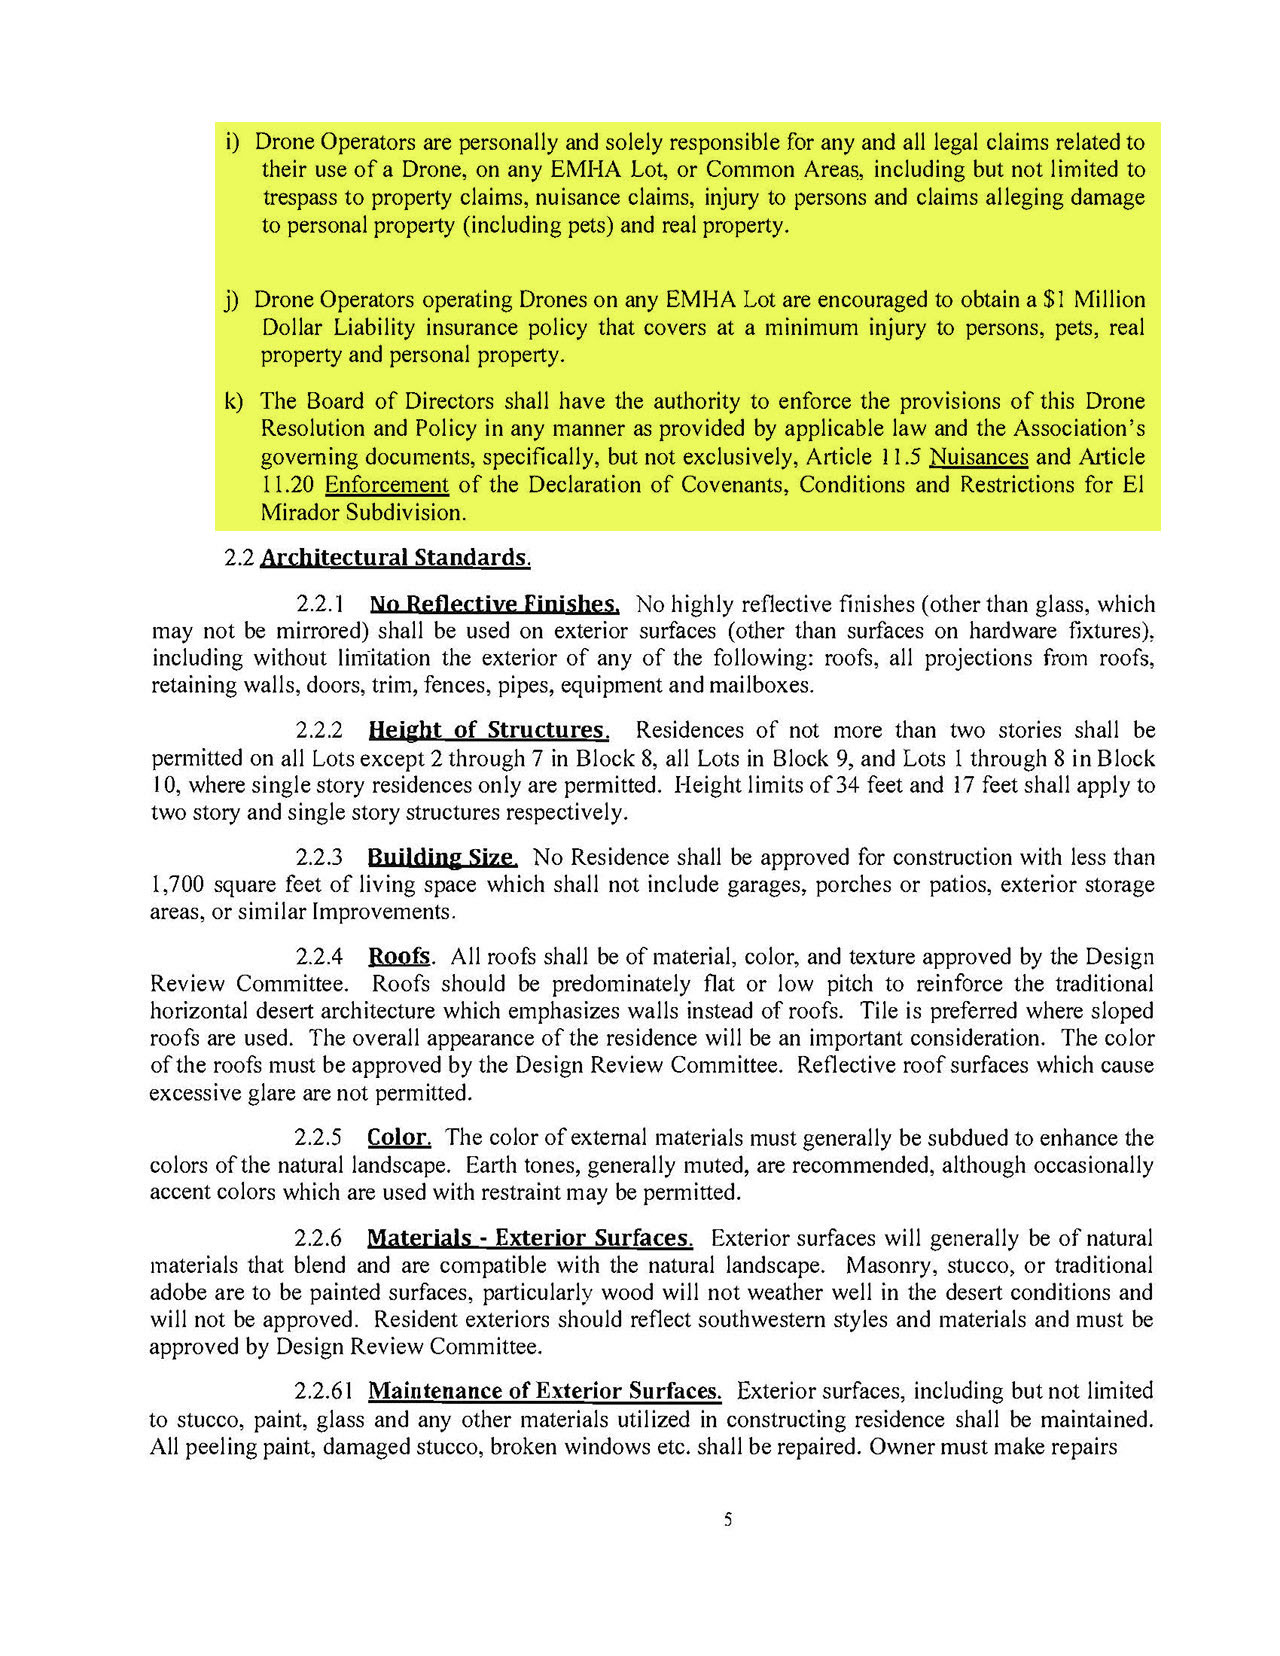 EMHA Design Review Guidelines Section 2.1.12 Drones, page 2.